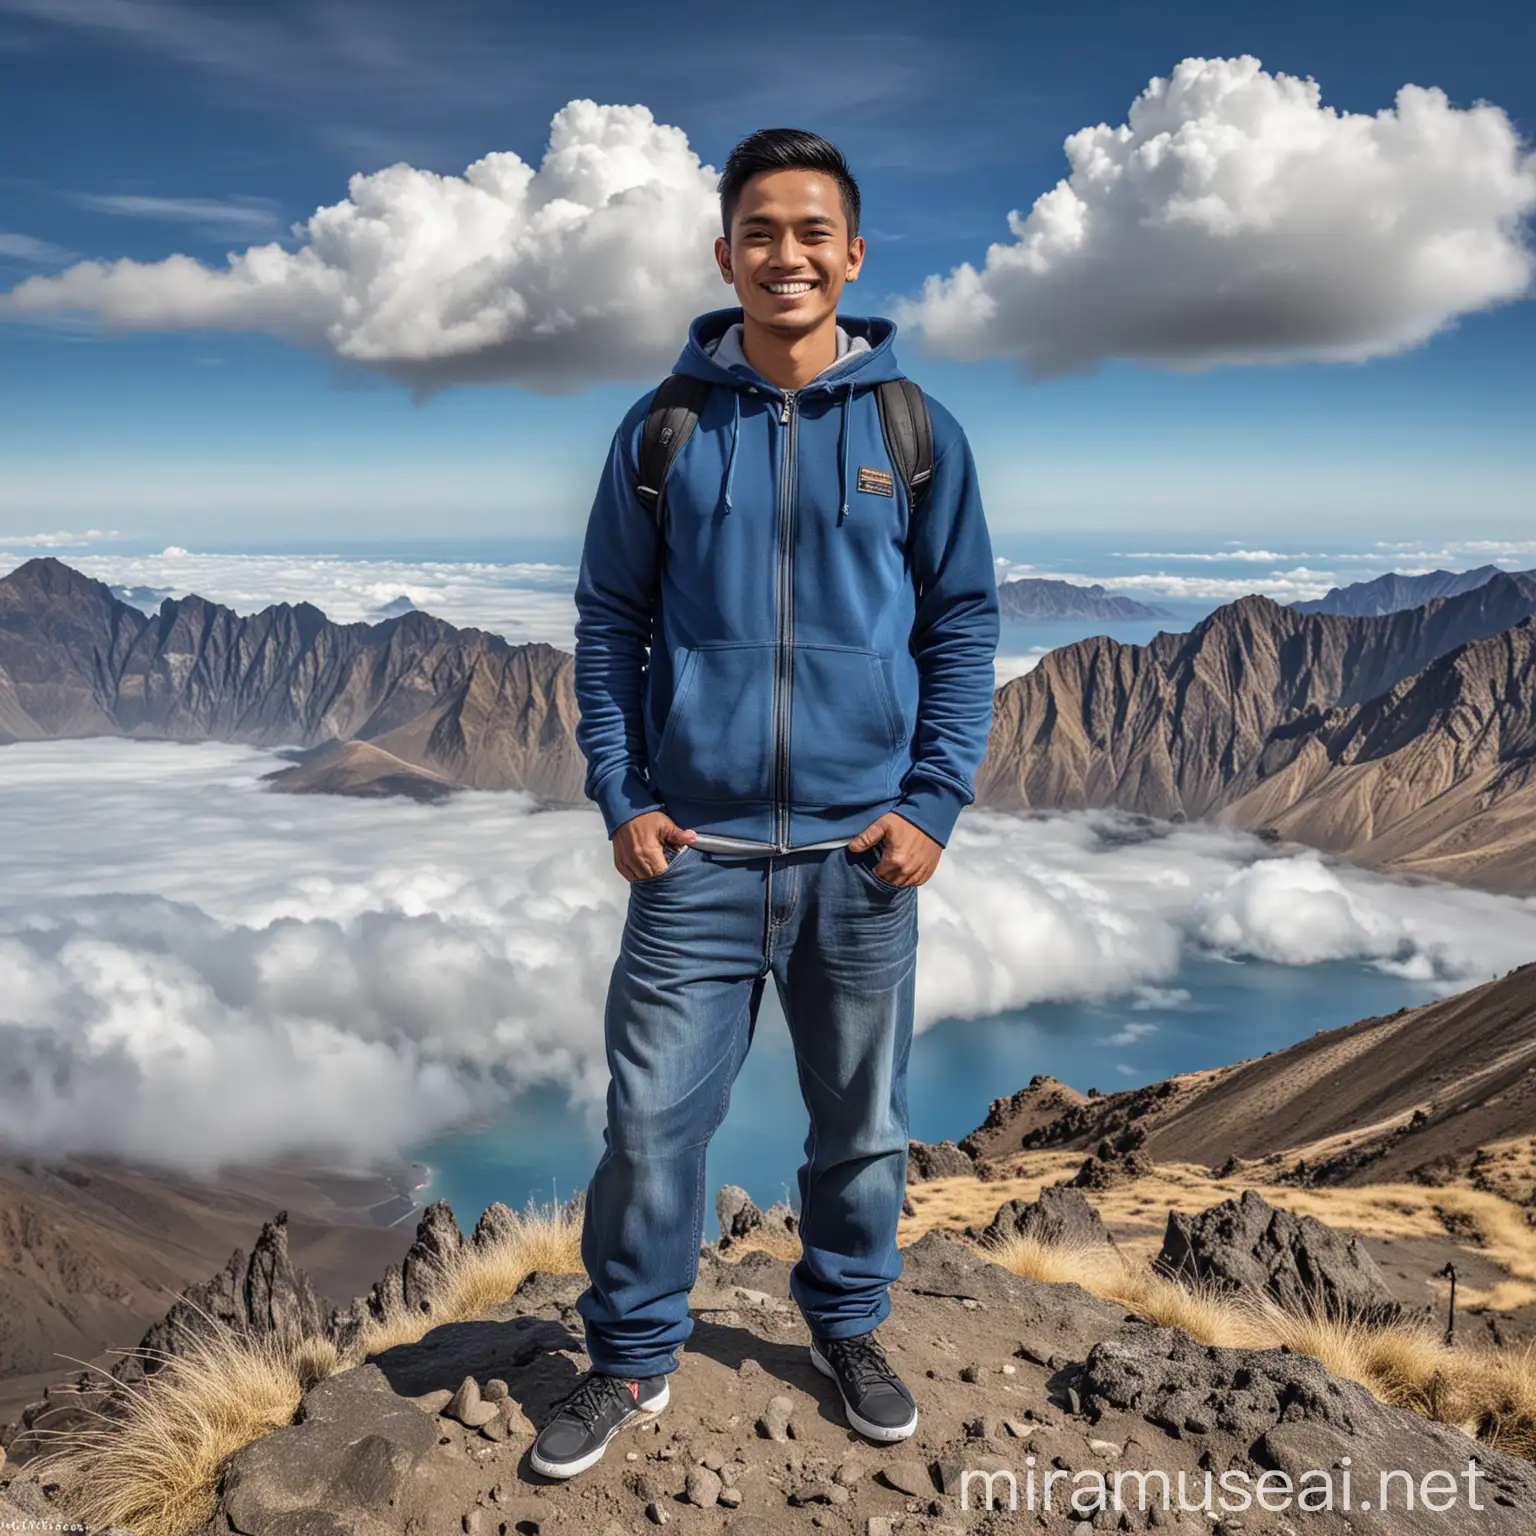 Smiling Indonesian Man on Mount Rinjani with Sea of Clouds